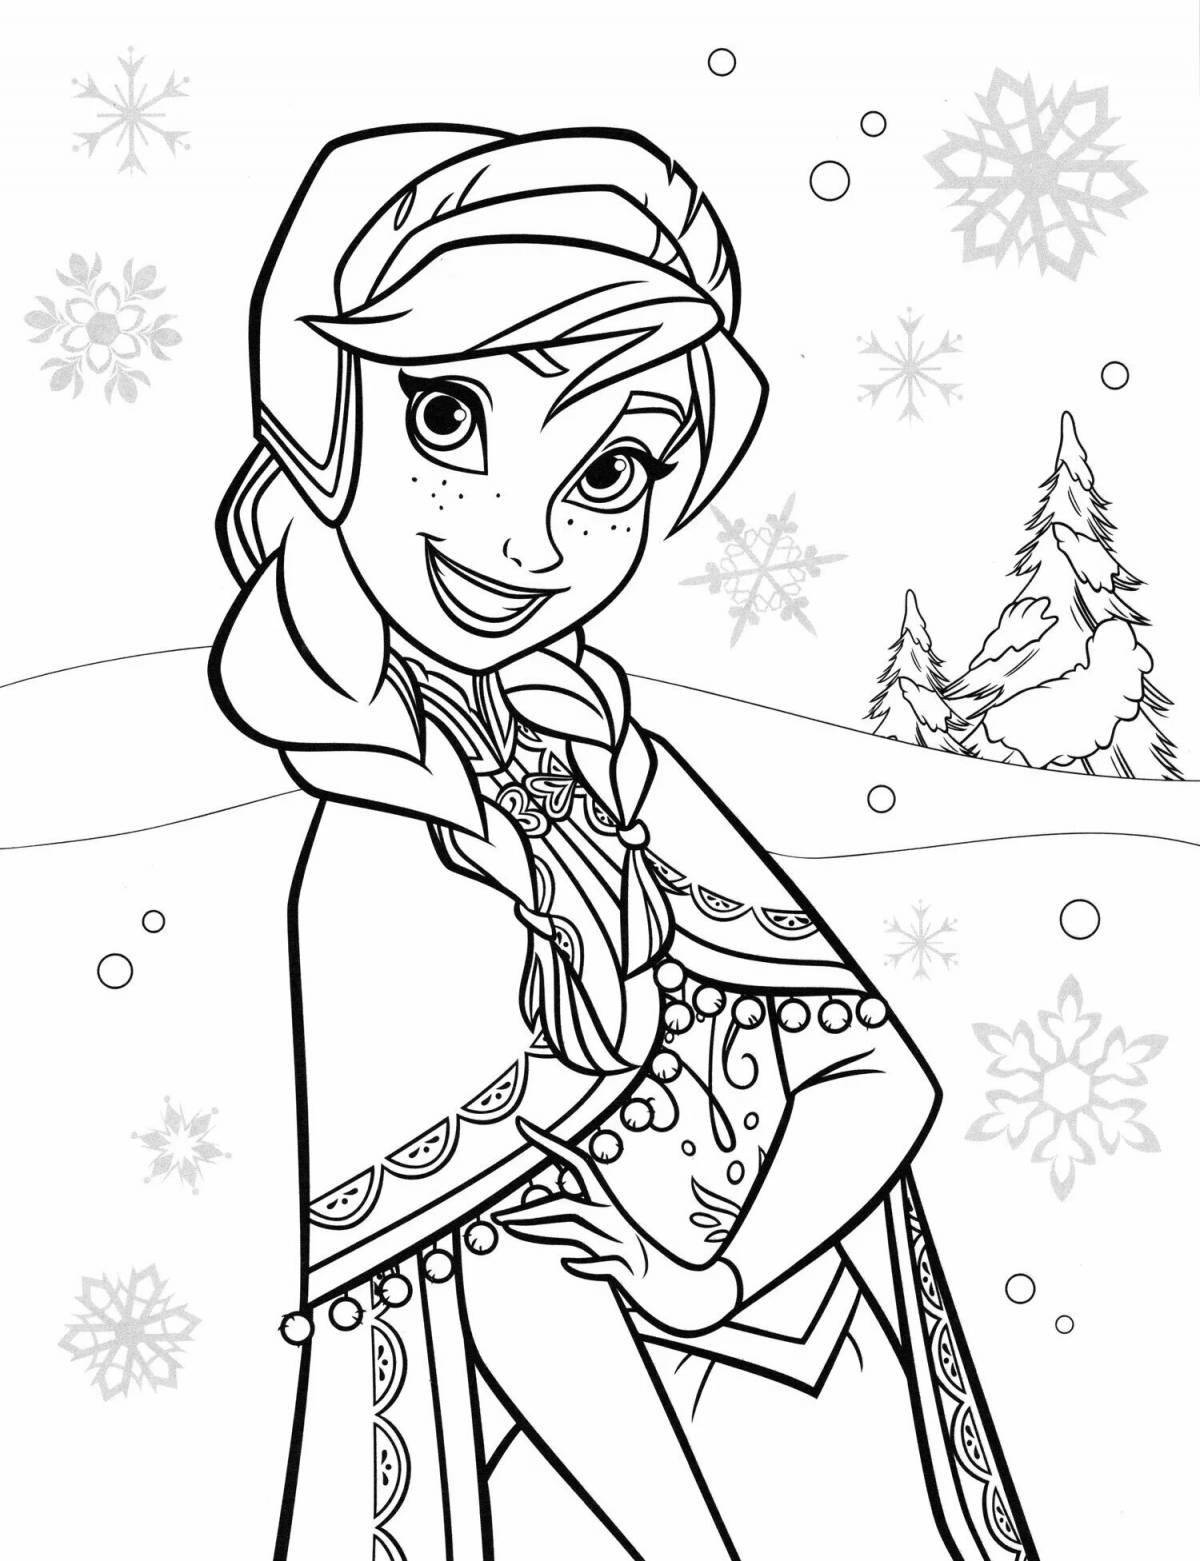 Delightful coloring of elsa and anna